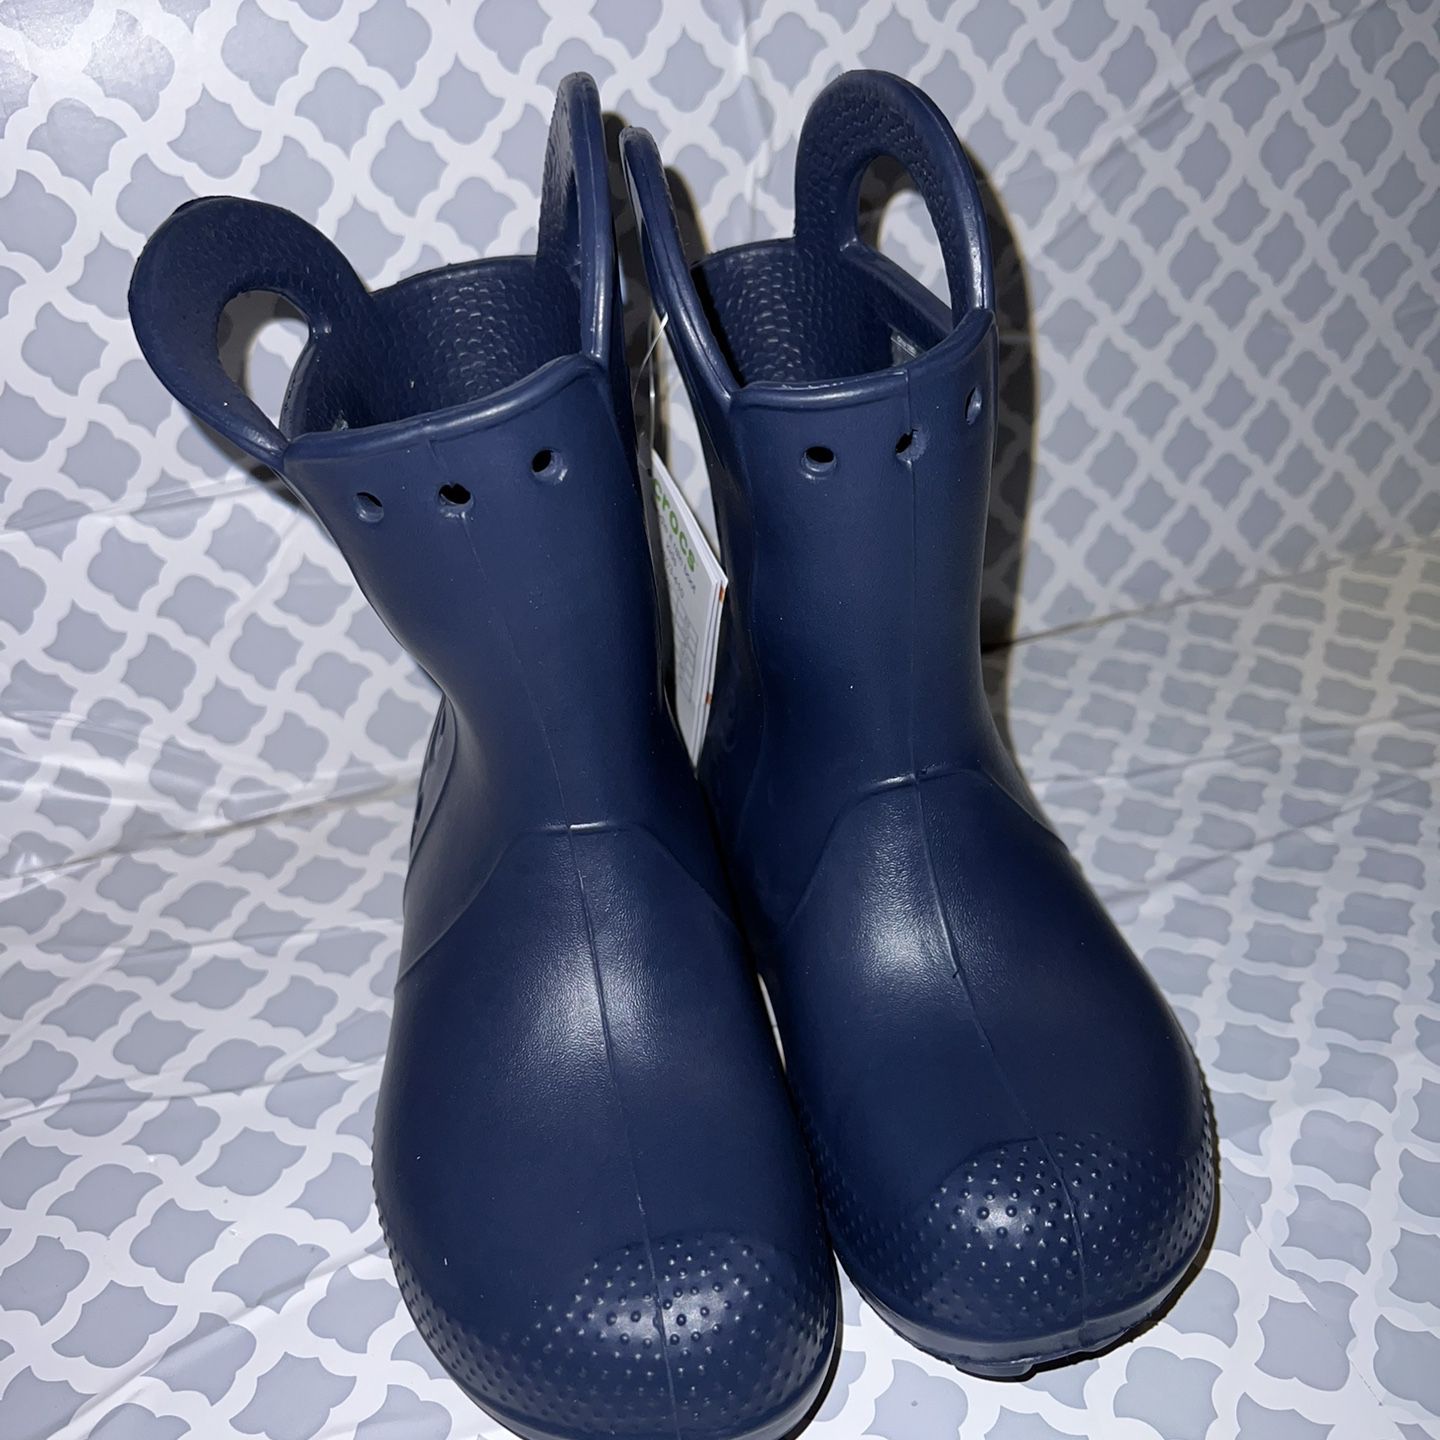 Kids Crocs Rain Boots for Sale in Colton, CA - OfferUp